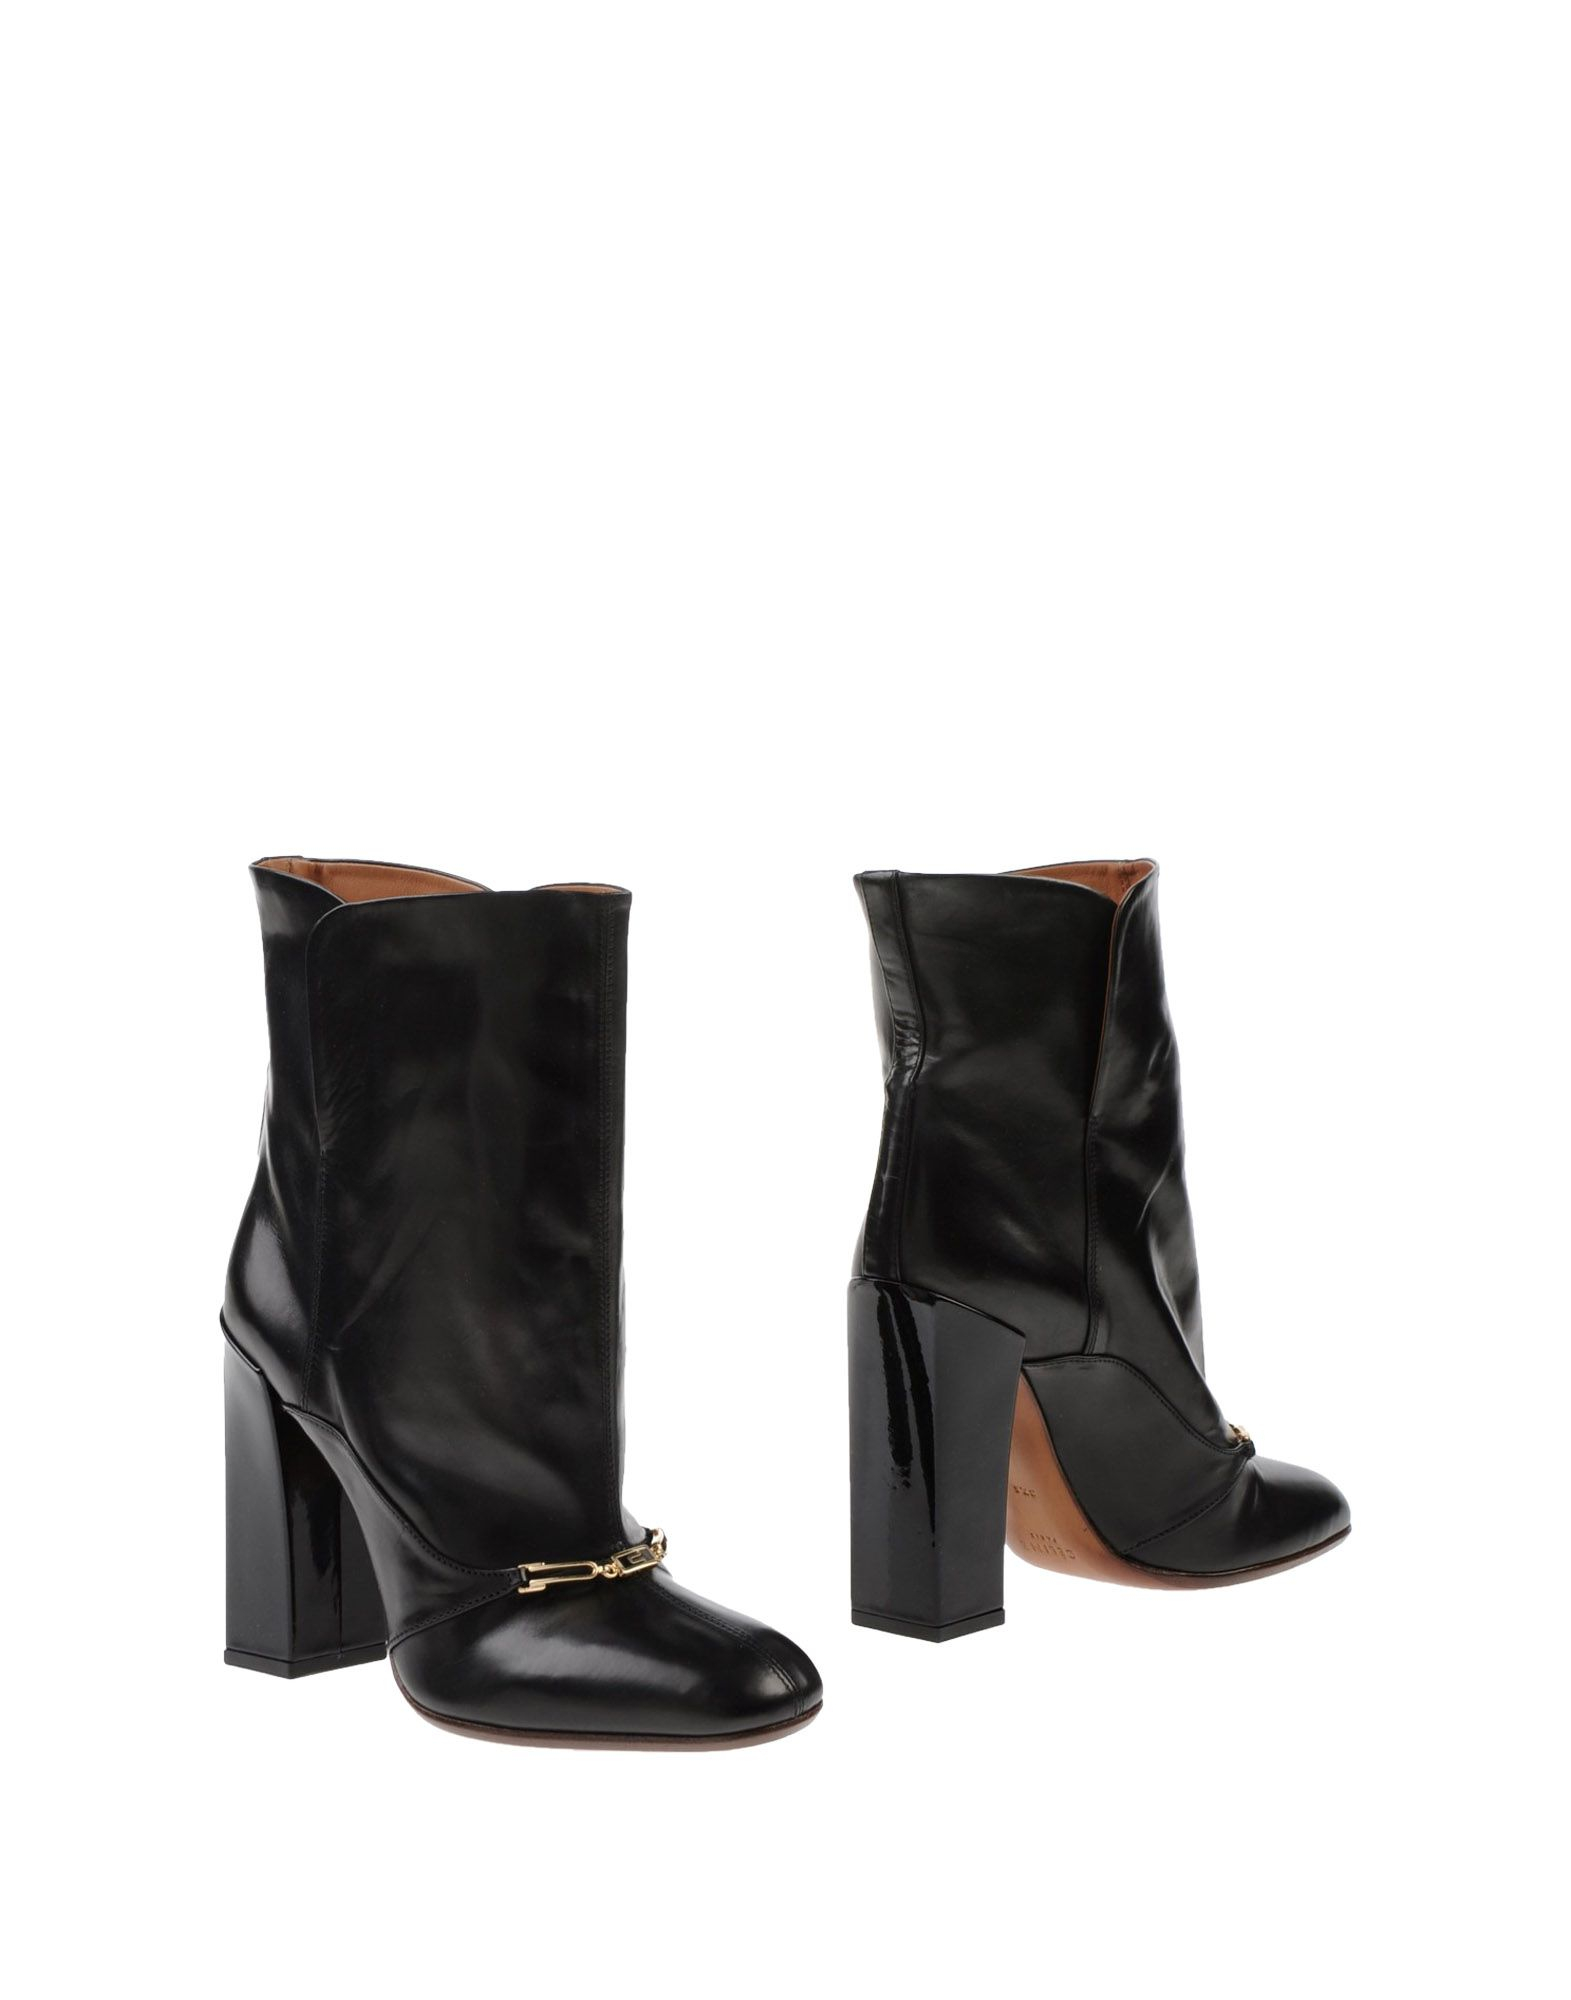 Celine Ankle Boots in Black | Lyst